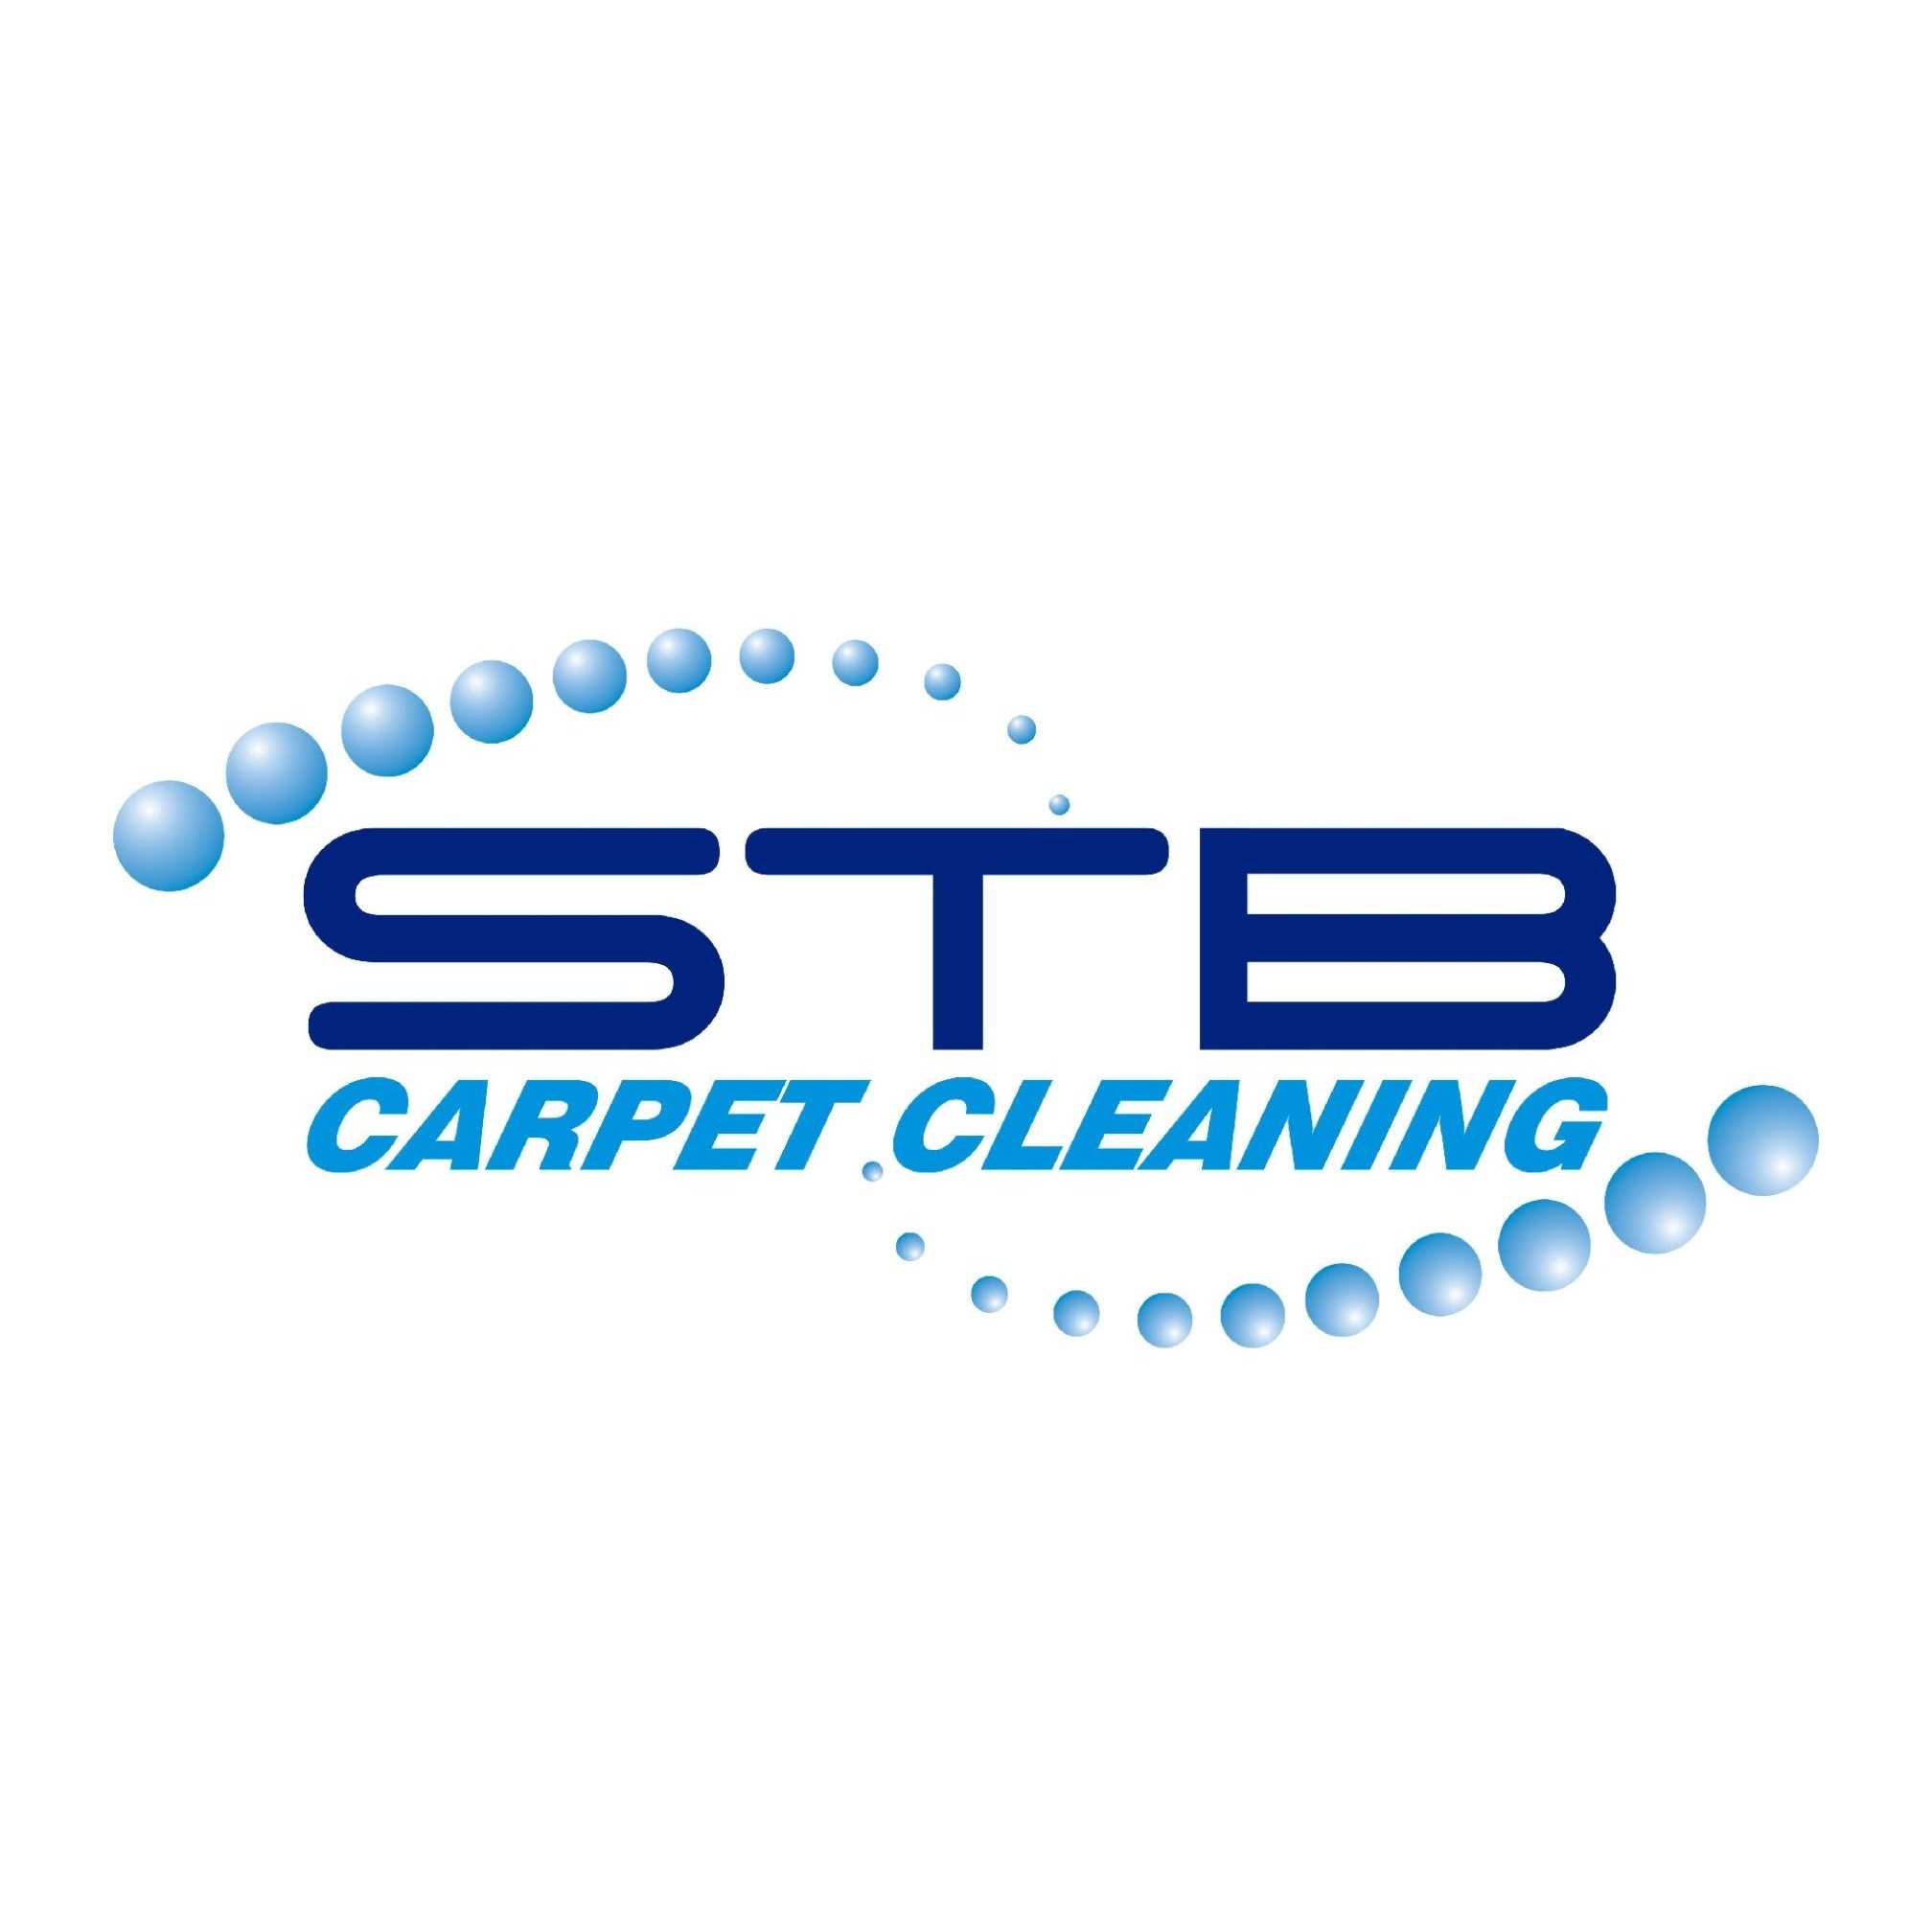 LOGO S T B Carpet Cleaning Leigh 01942 269146